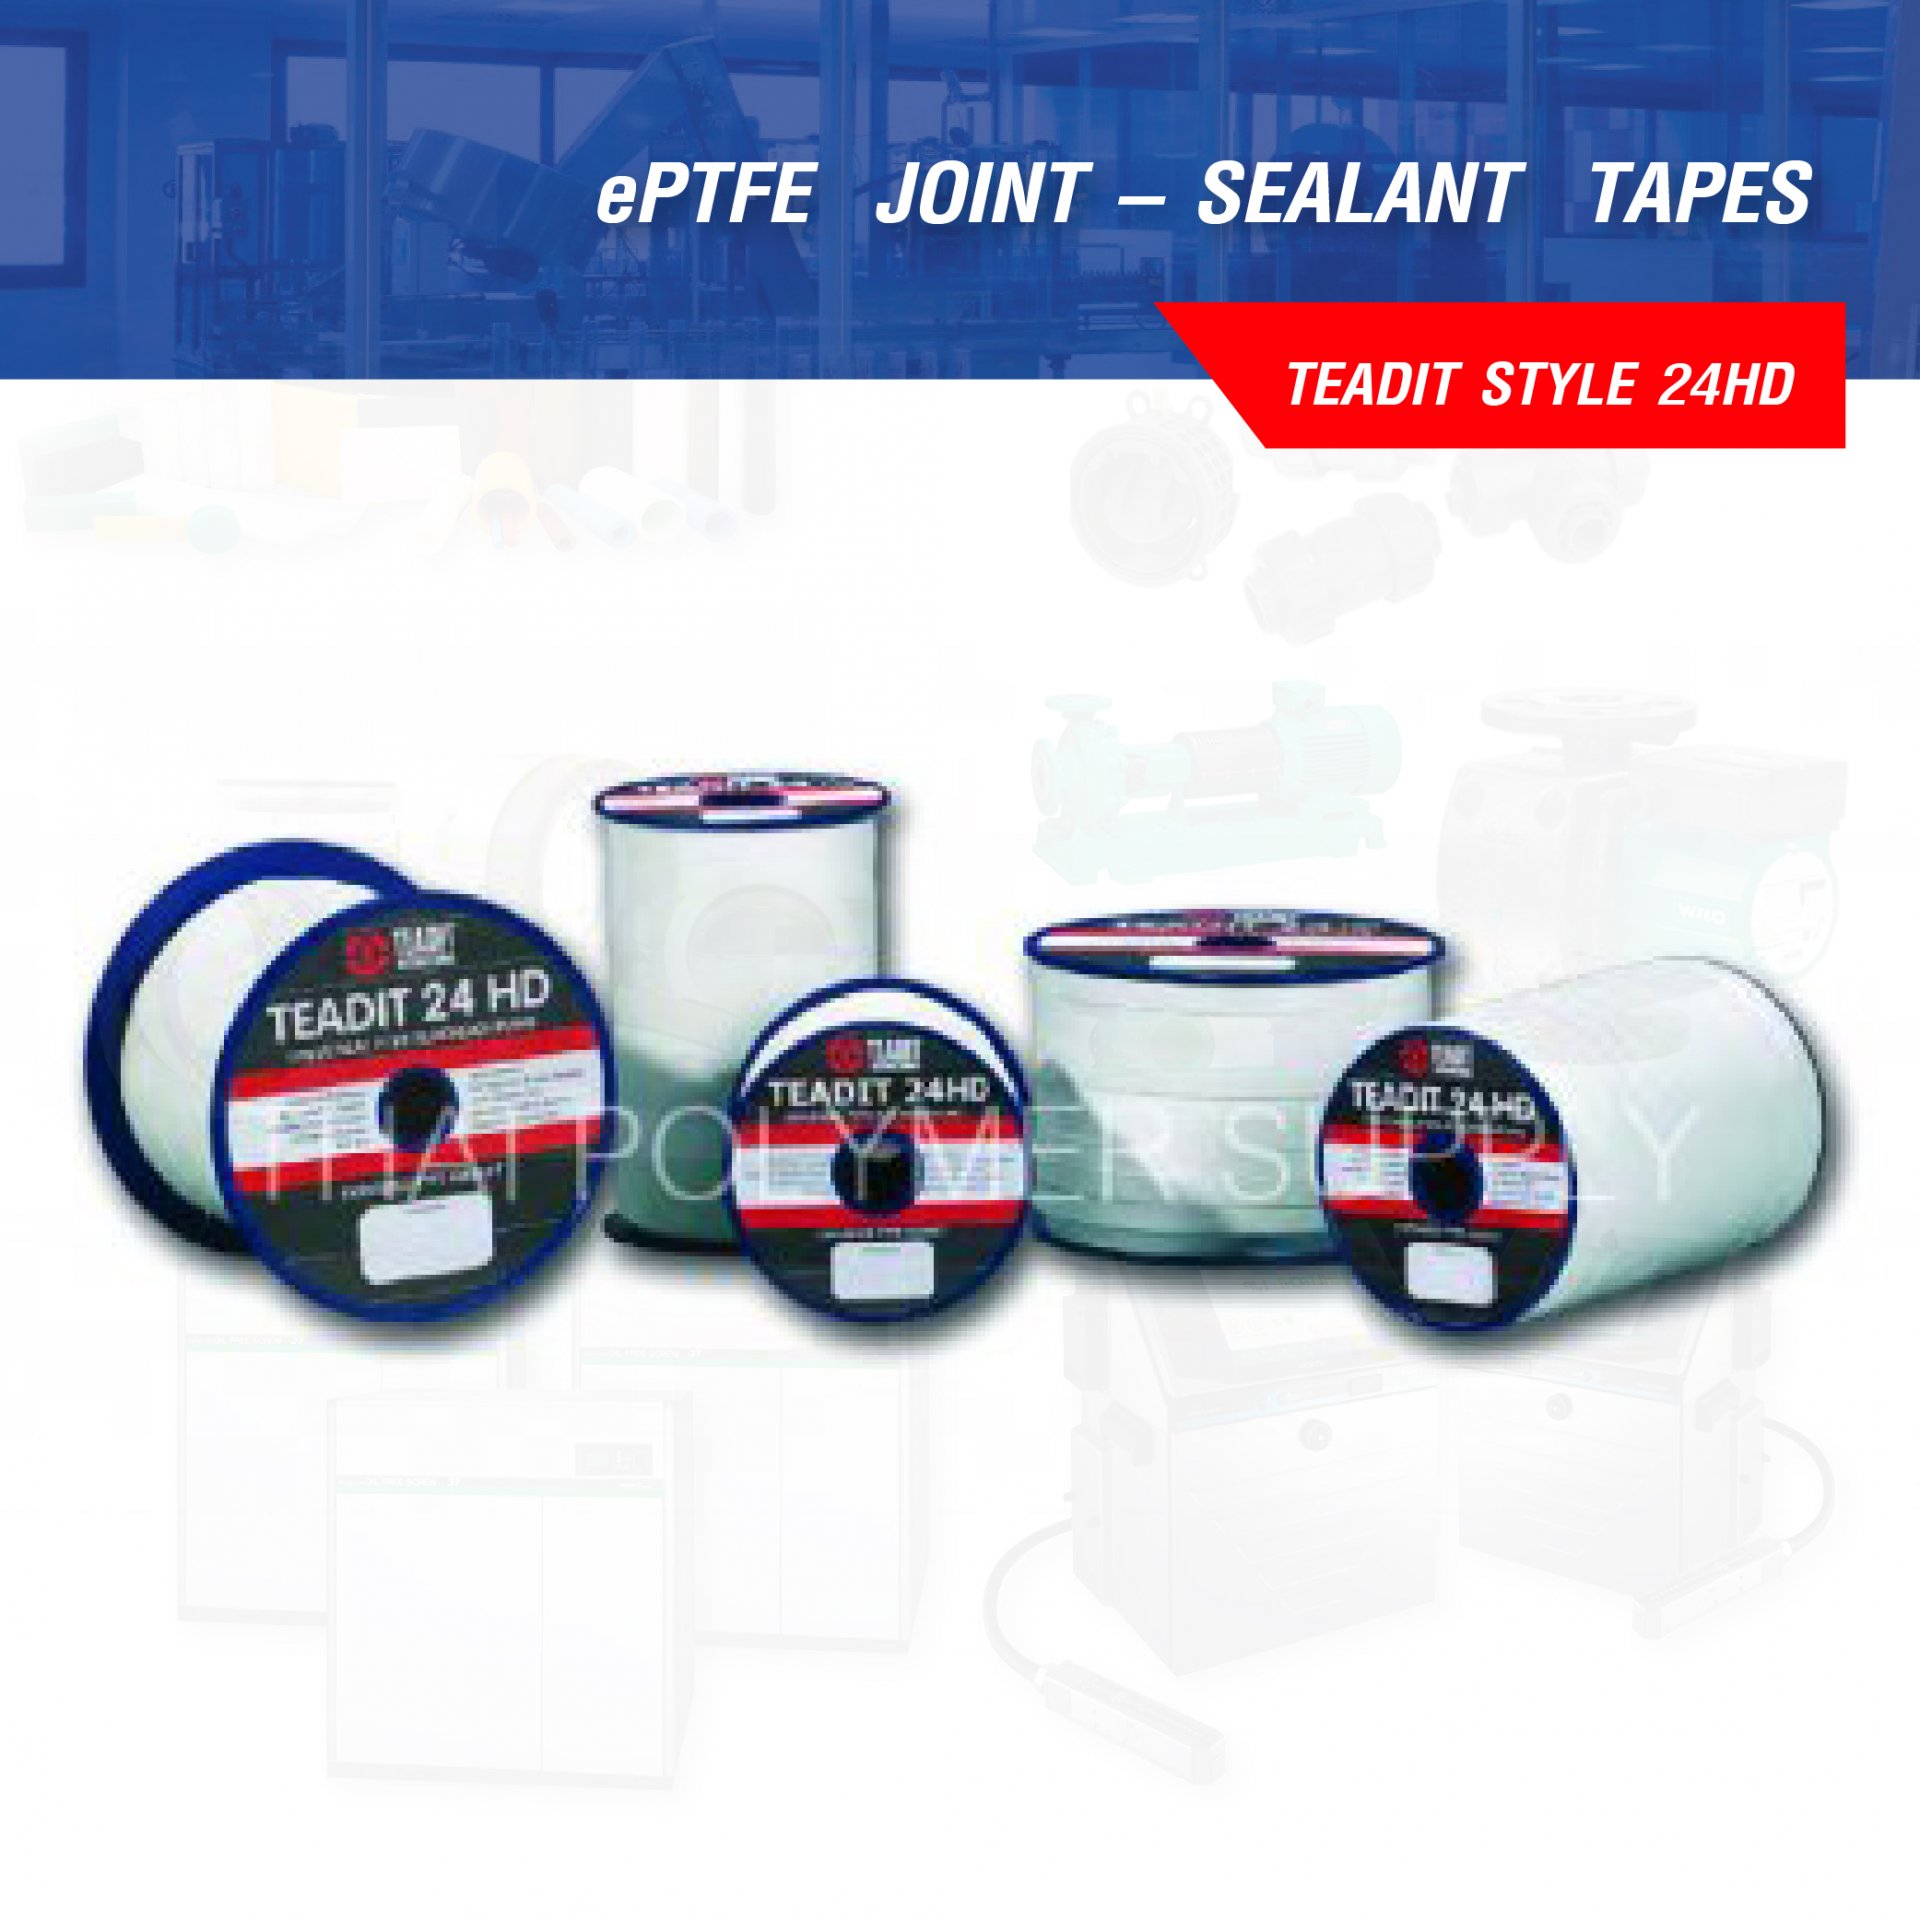 ePTFE  JOINT – SEALANT  TAPES